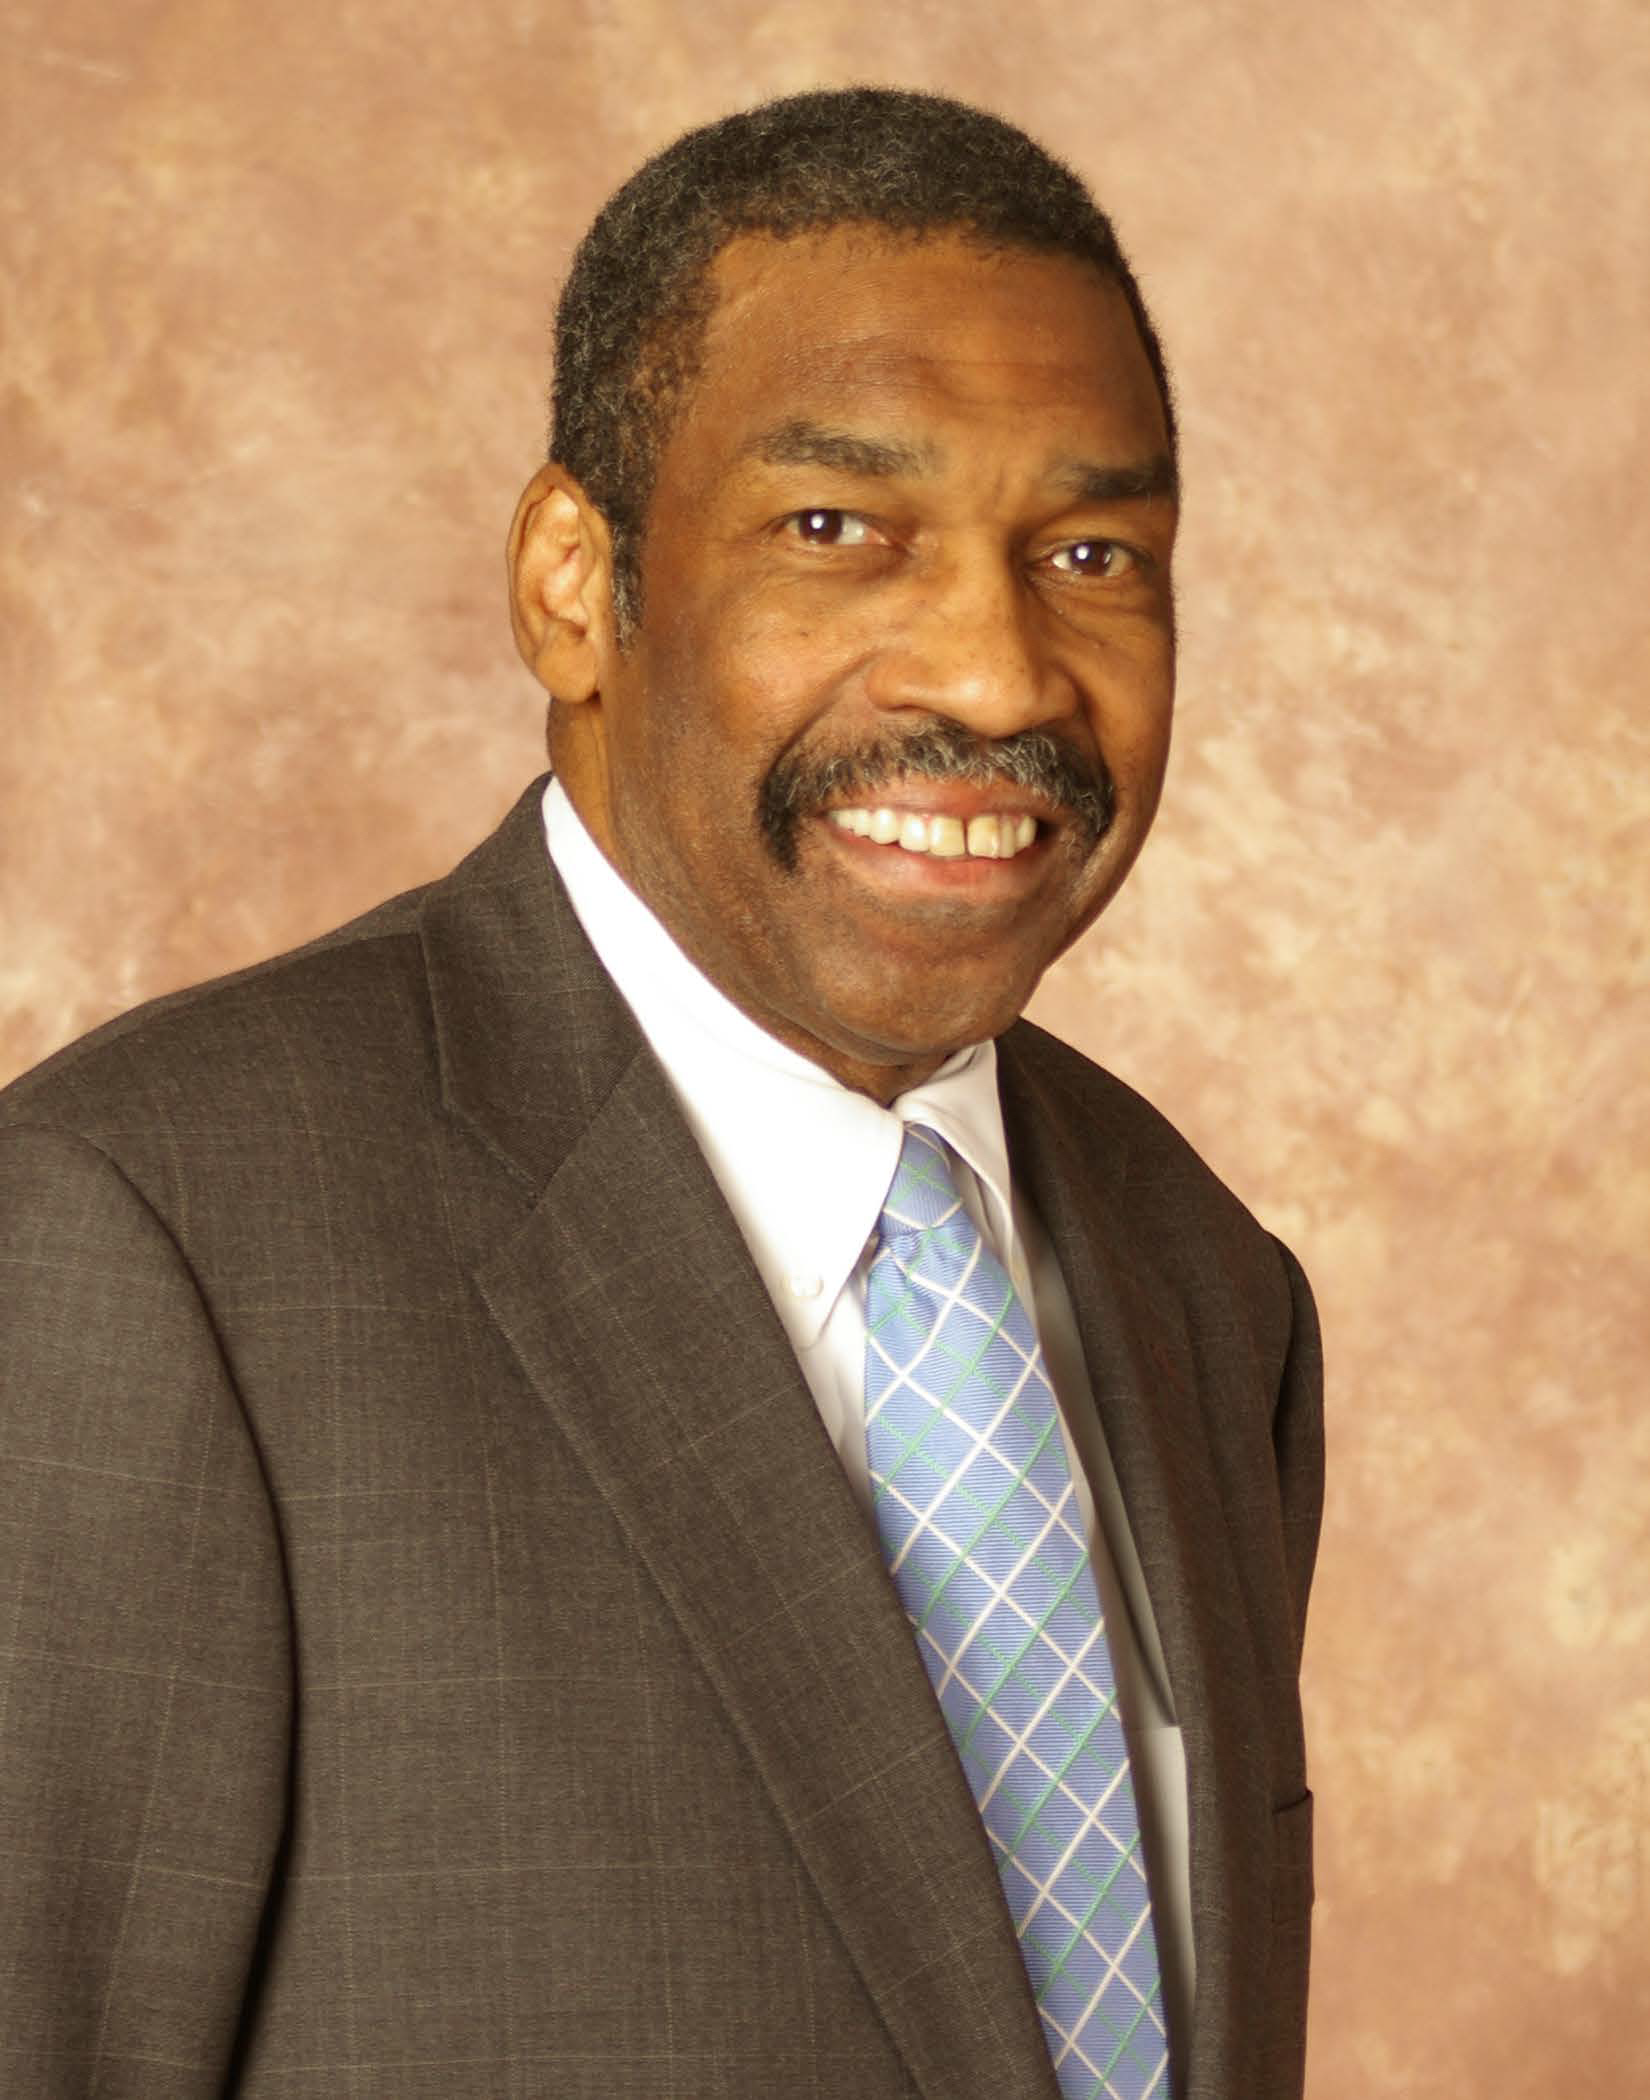  "The Art of Leadership" presented by Bill Strickland